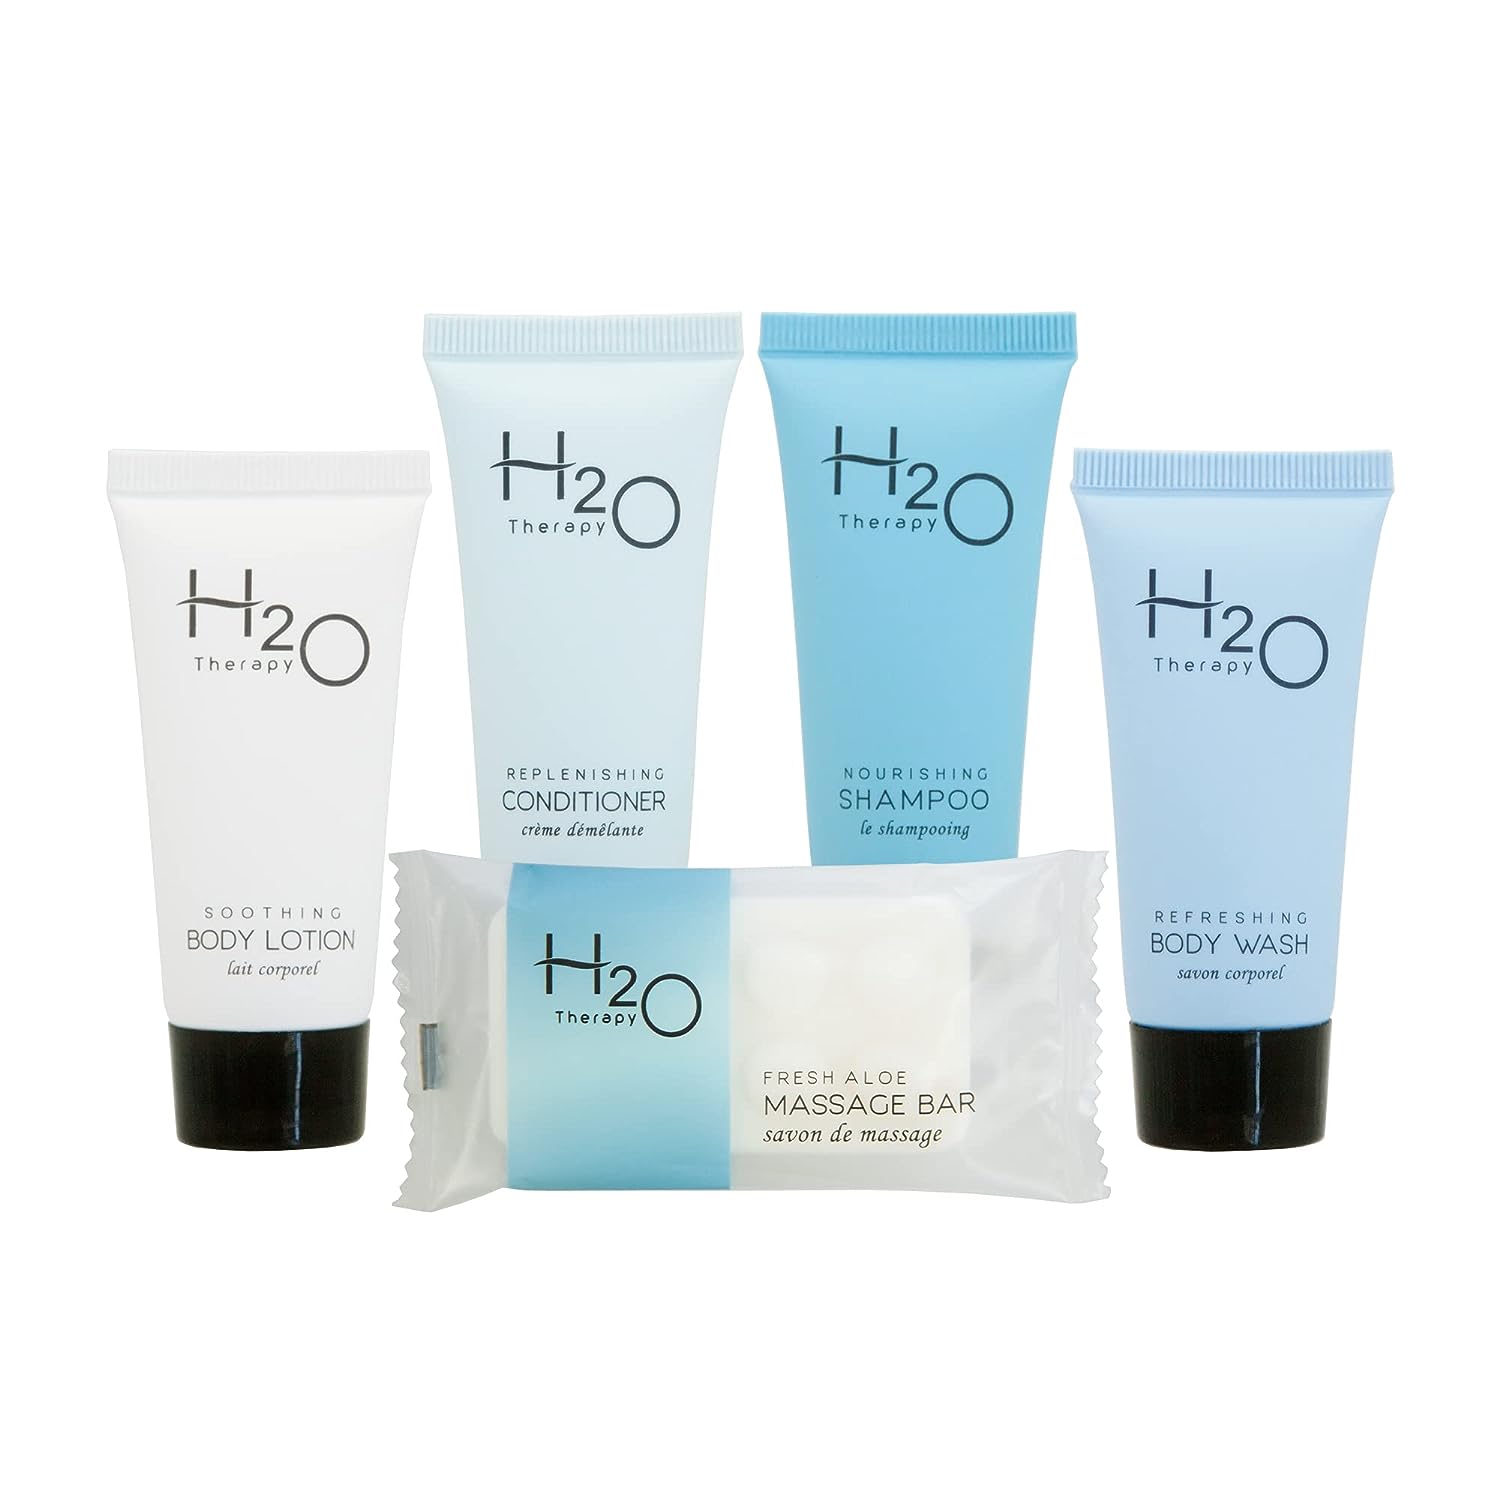 H2O Therapy Hotel Soaps and Toiletries Bulk Set | 1-Shoppe All-In-Kit Amenities for Hotels & Airbnb | .85 Hotel Shampoo & Conditioner, Body Wash, Body Lotion & 1  Bar Soap Travel Size | 75 Pieces